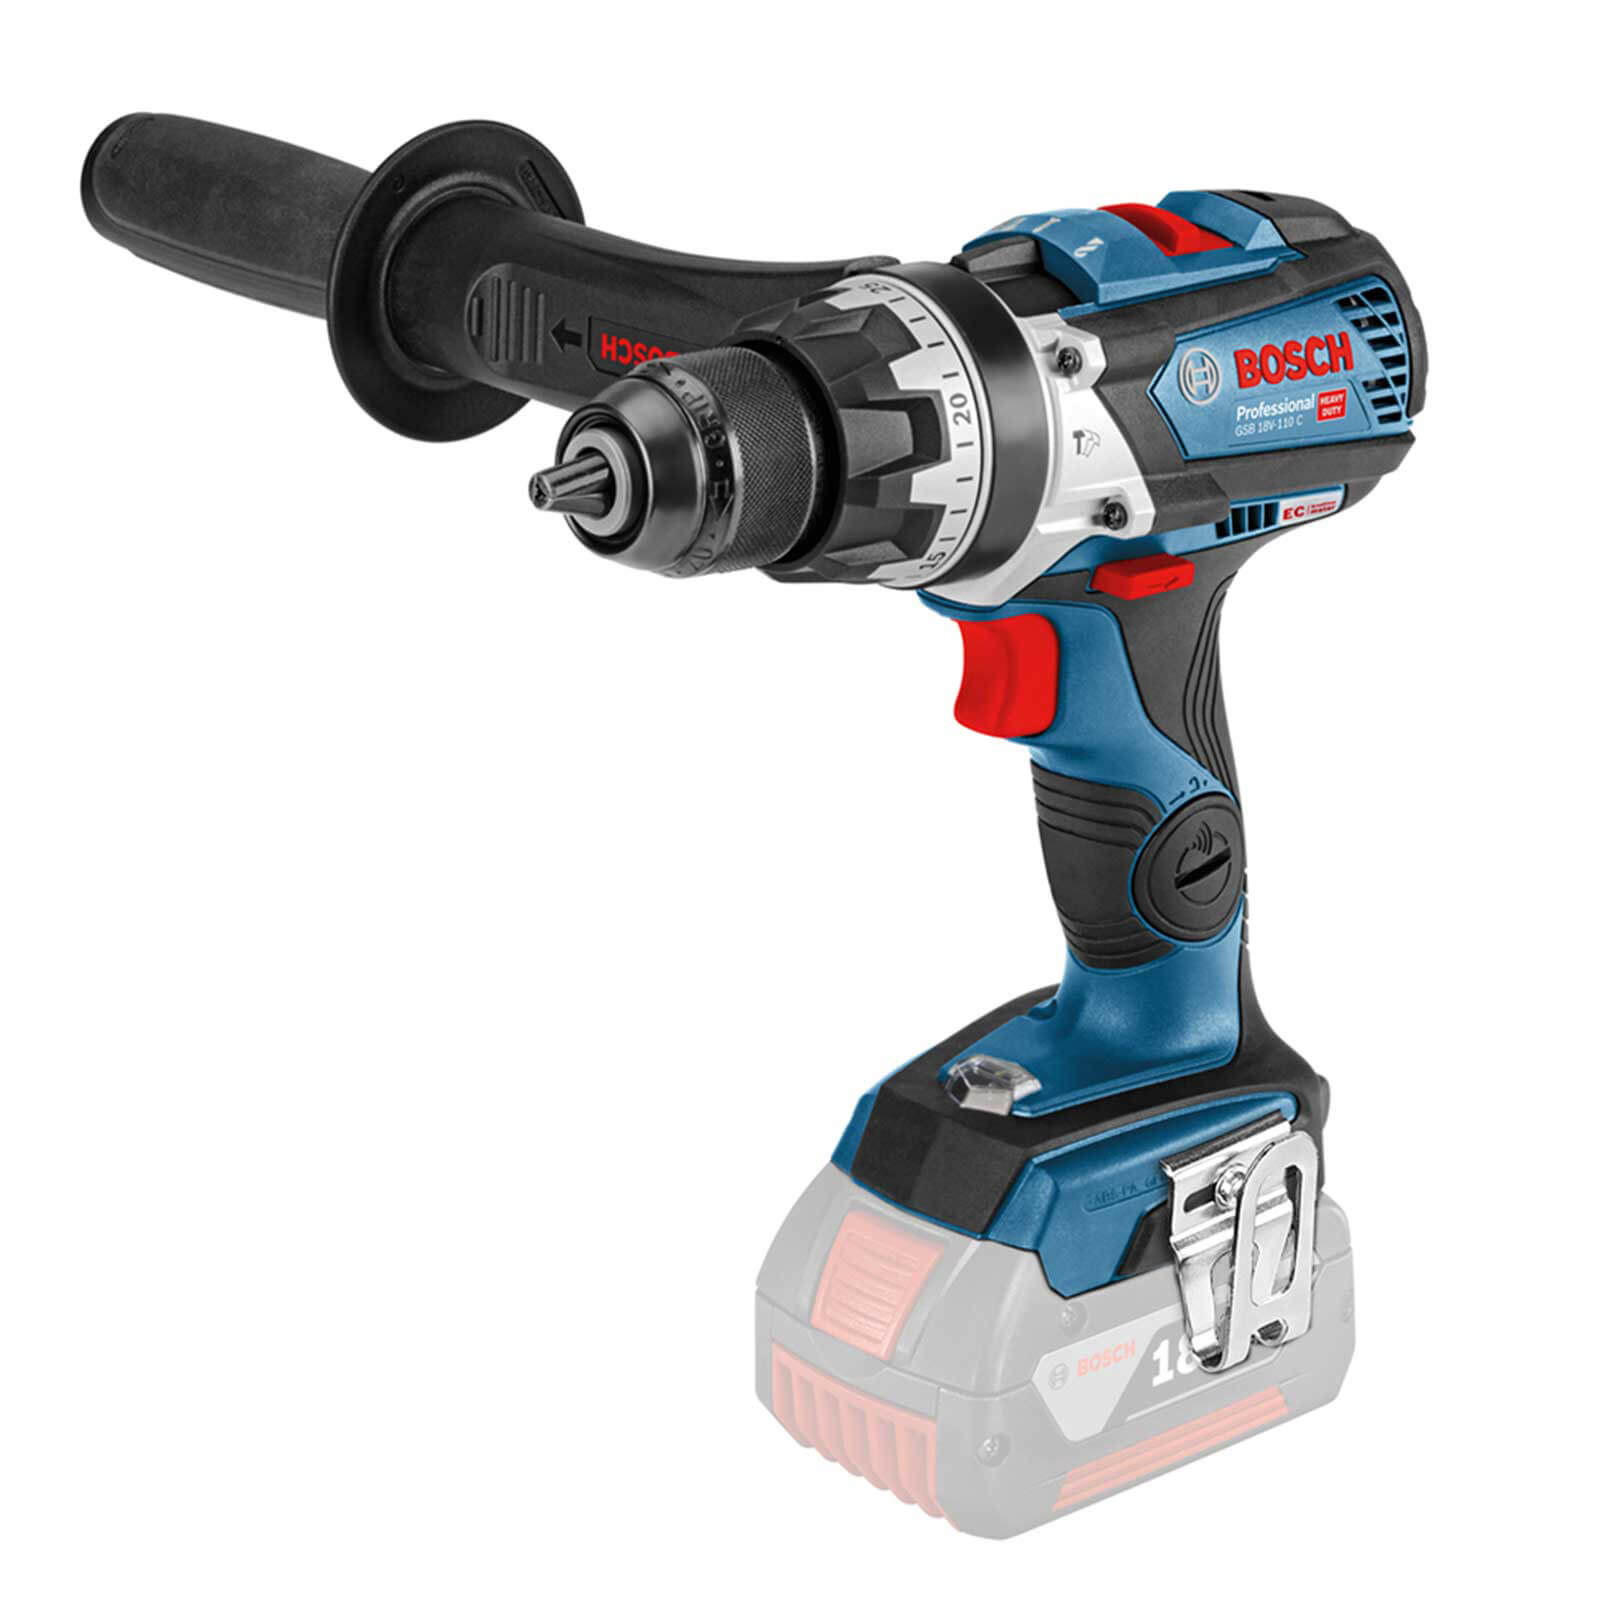 Image of Bosch GSB 18V-110 18v Cordless Brushless Combi Drill Connect Ready No Batteries No Charger No Case